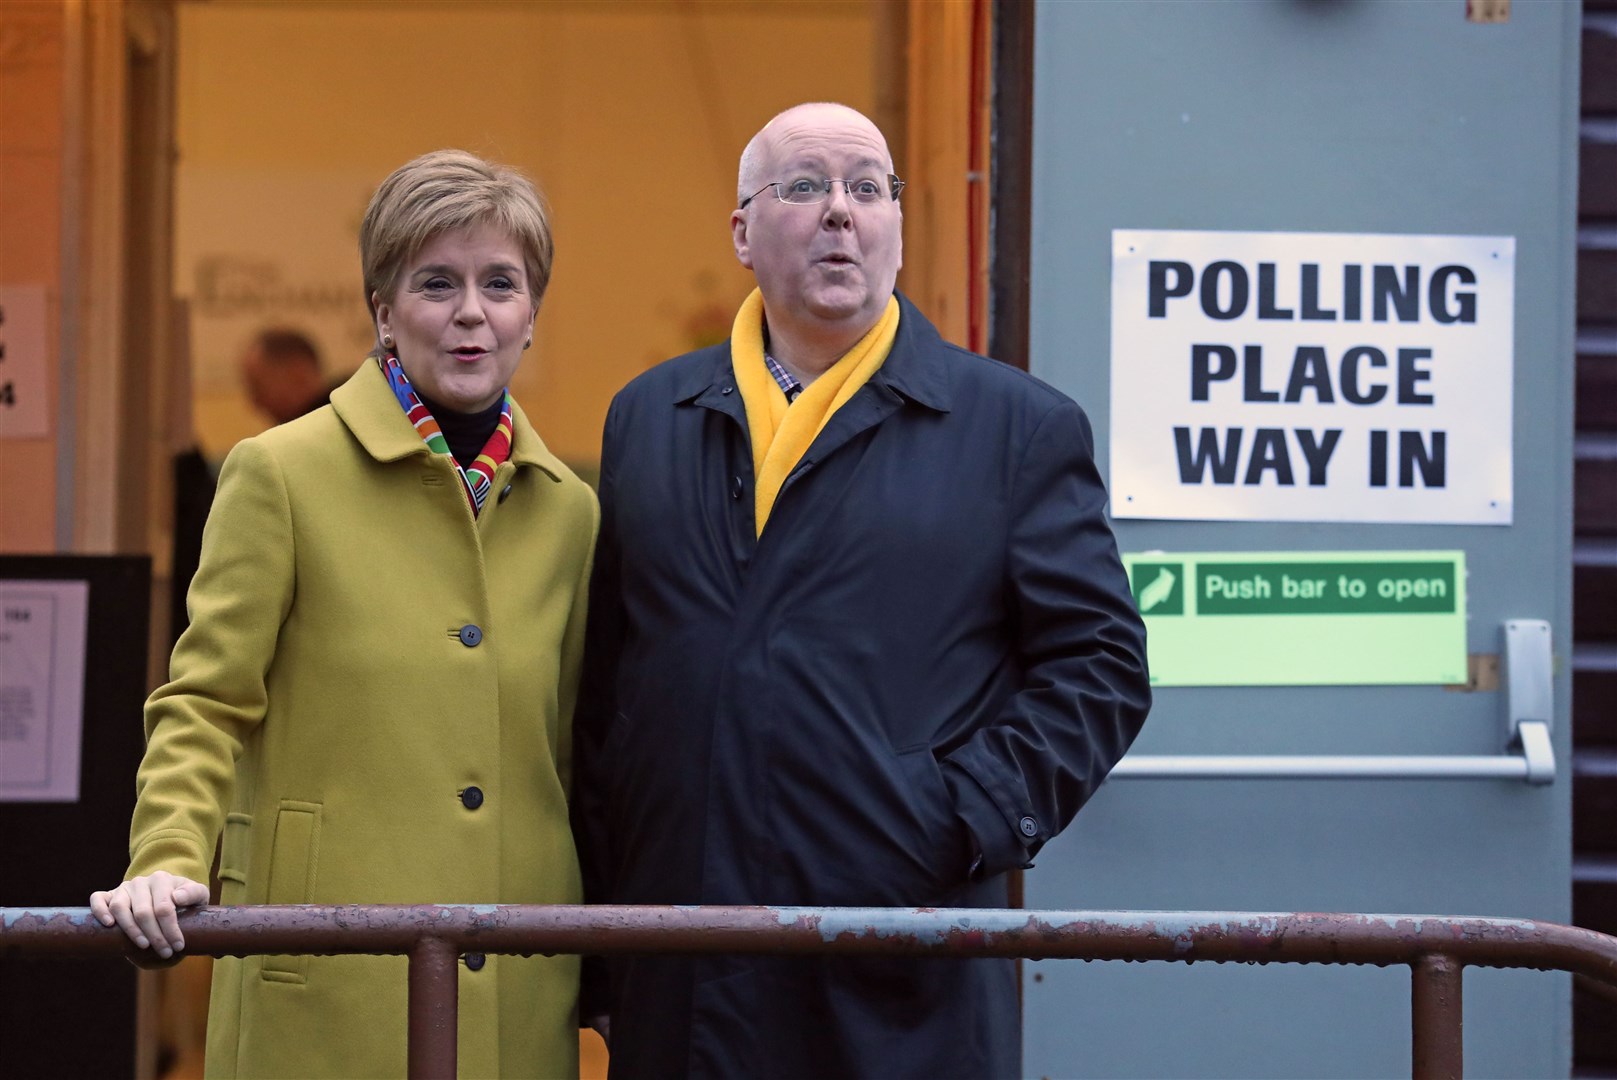 Nicola Sturgeon’s performance at the ballot box as leader of the SNP was unmatched (Andrew Milligan/PA)